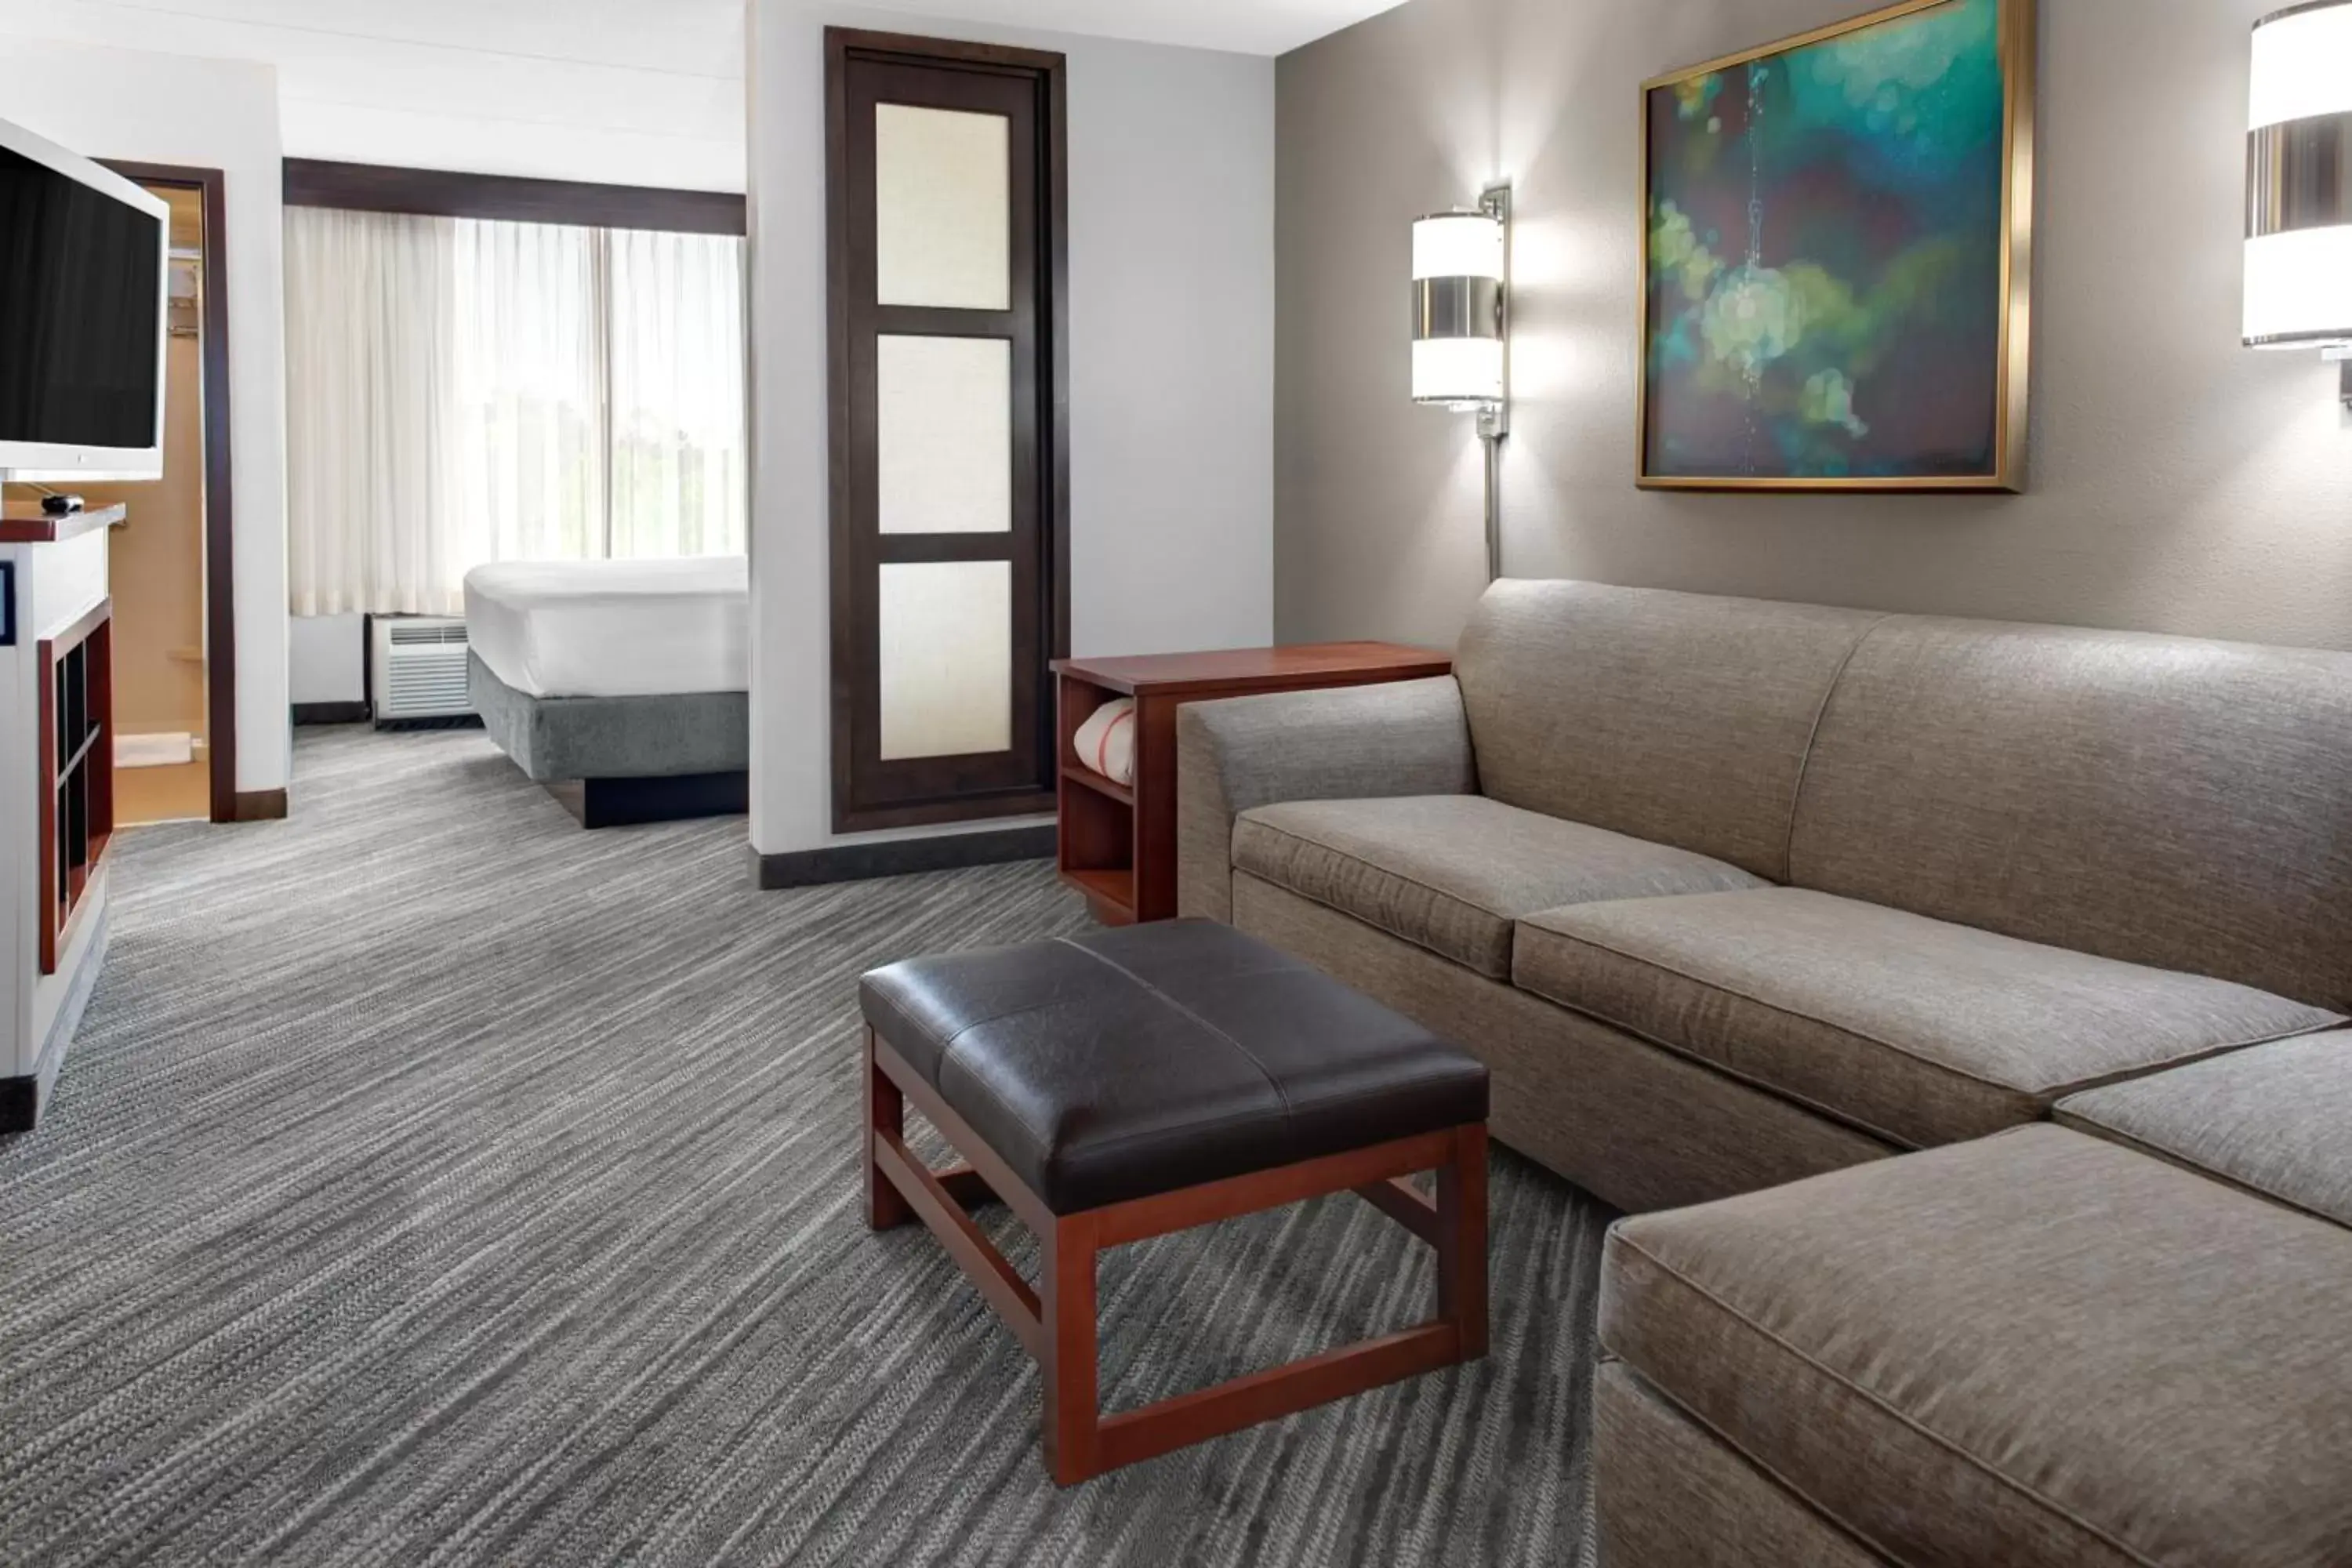 Specialty King Room with Sofa Bed in Hyatt Place Atlanta / Norcross / Peachtree